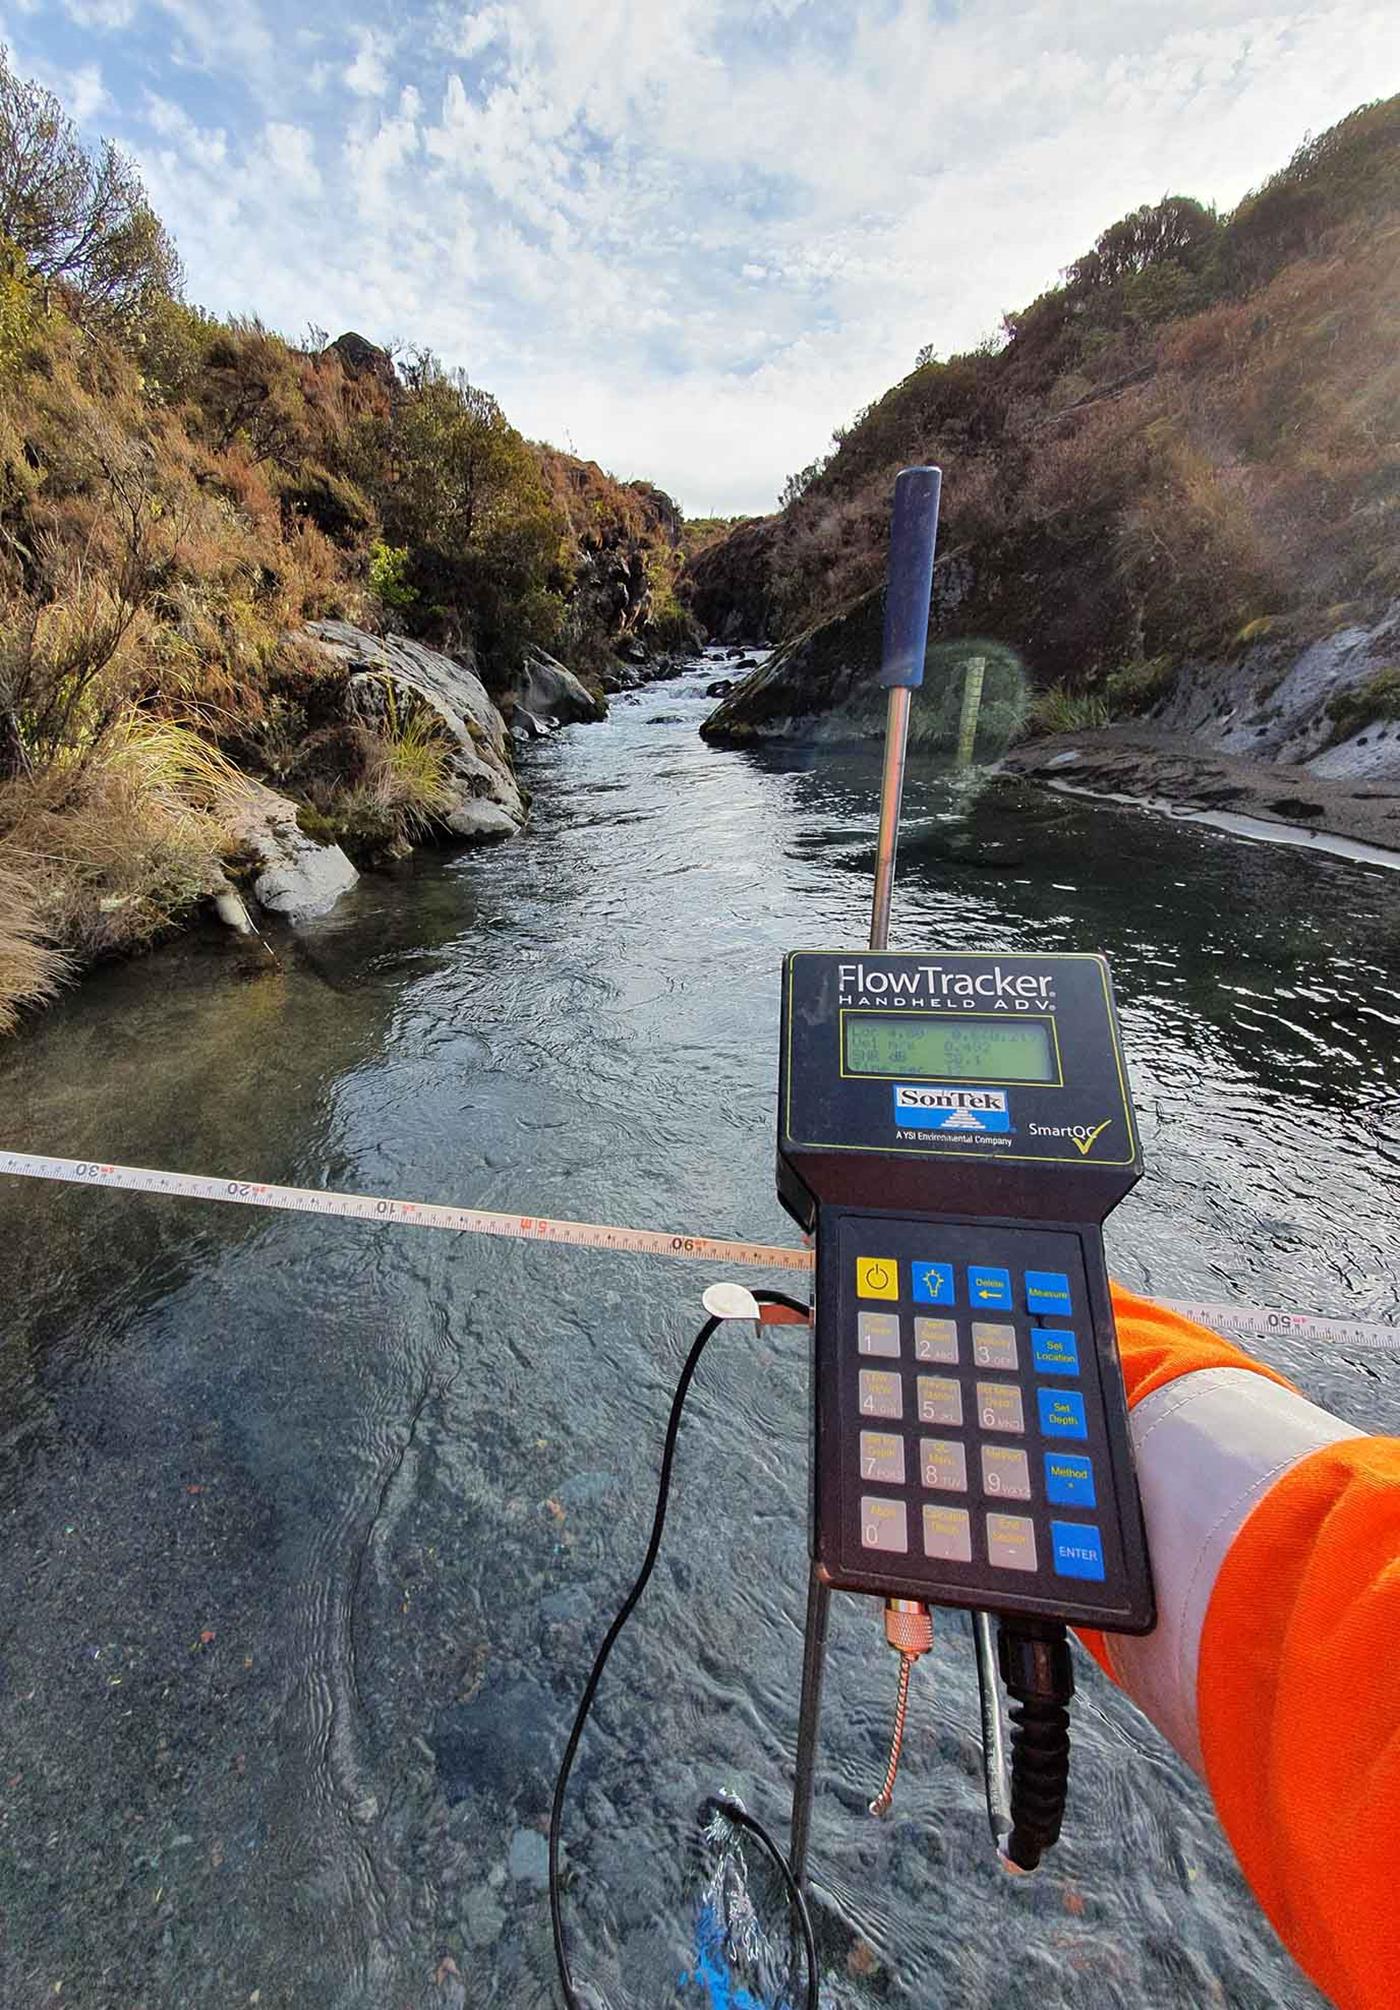 flow tracker at hydro plant